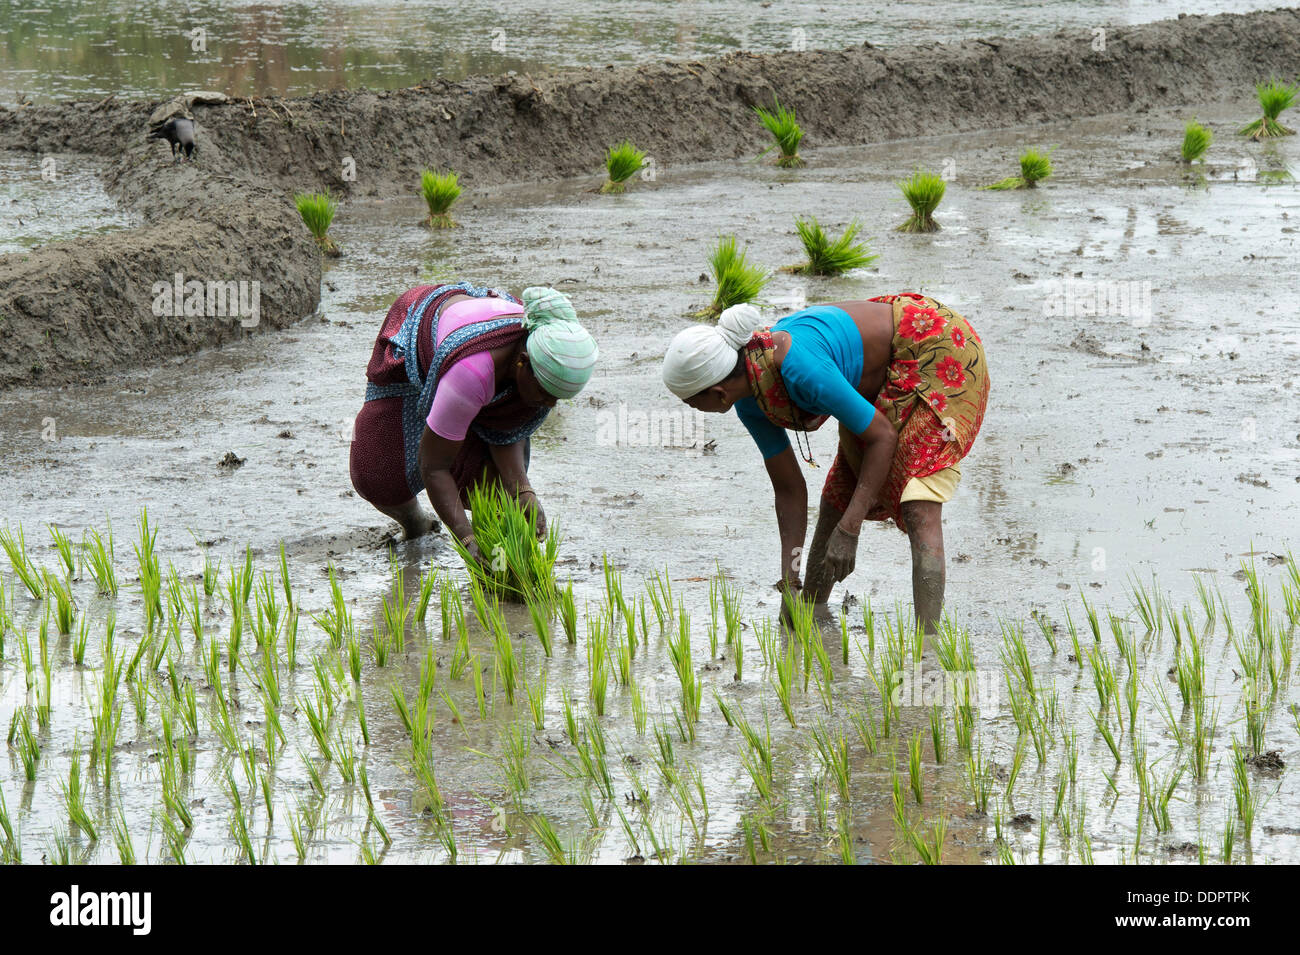 Indian women planting young rice plants in a paddy field. Andhra Pradesh, India Stock Photo